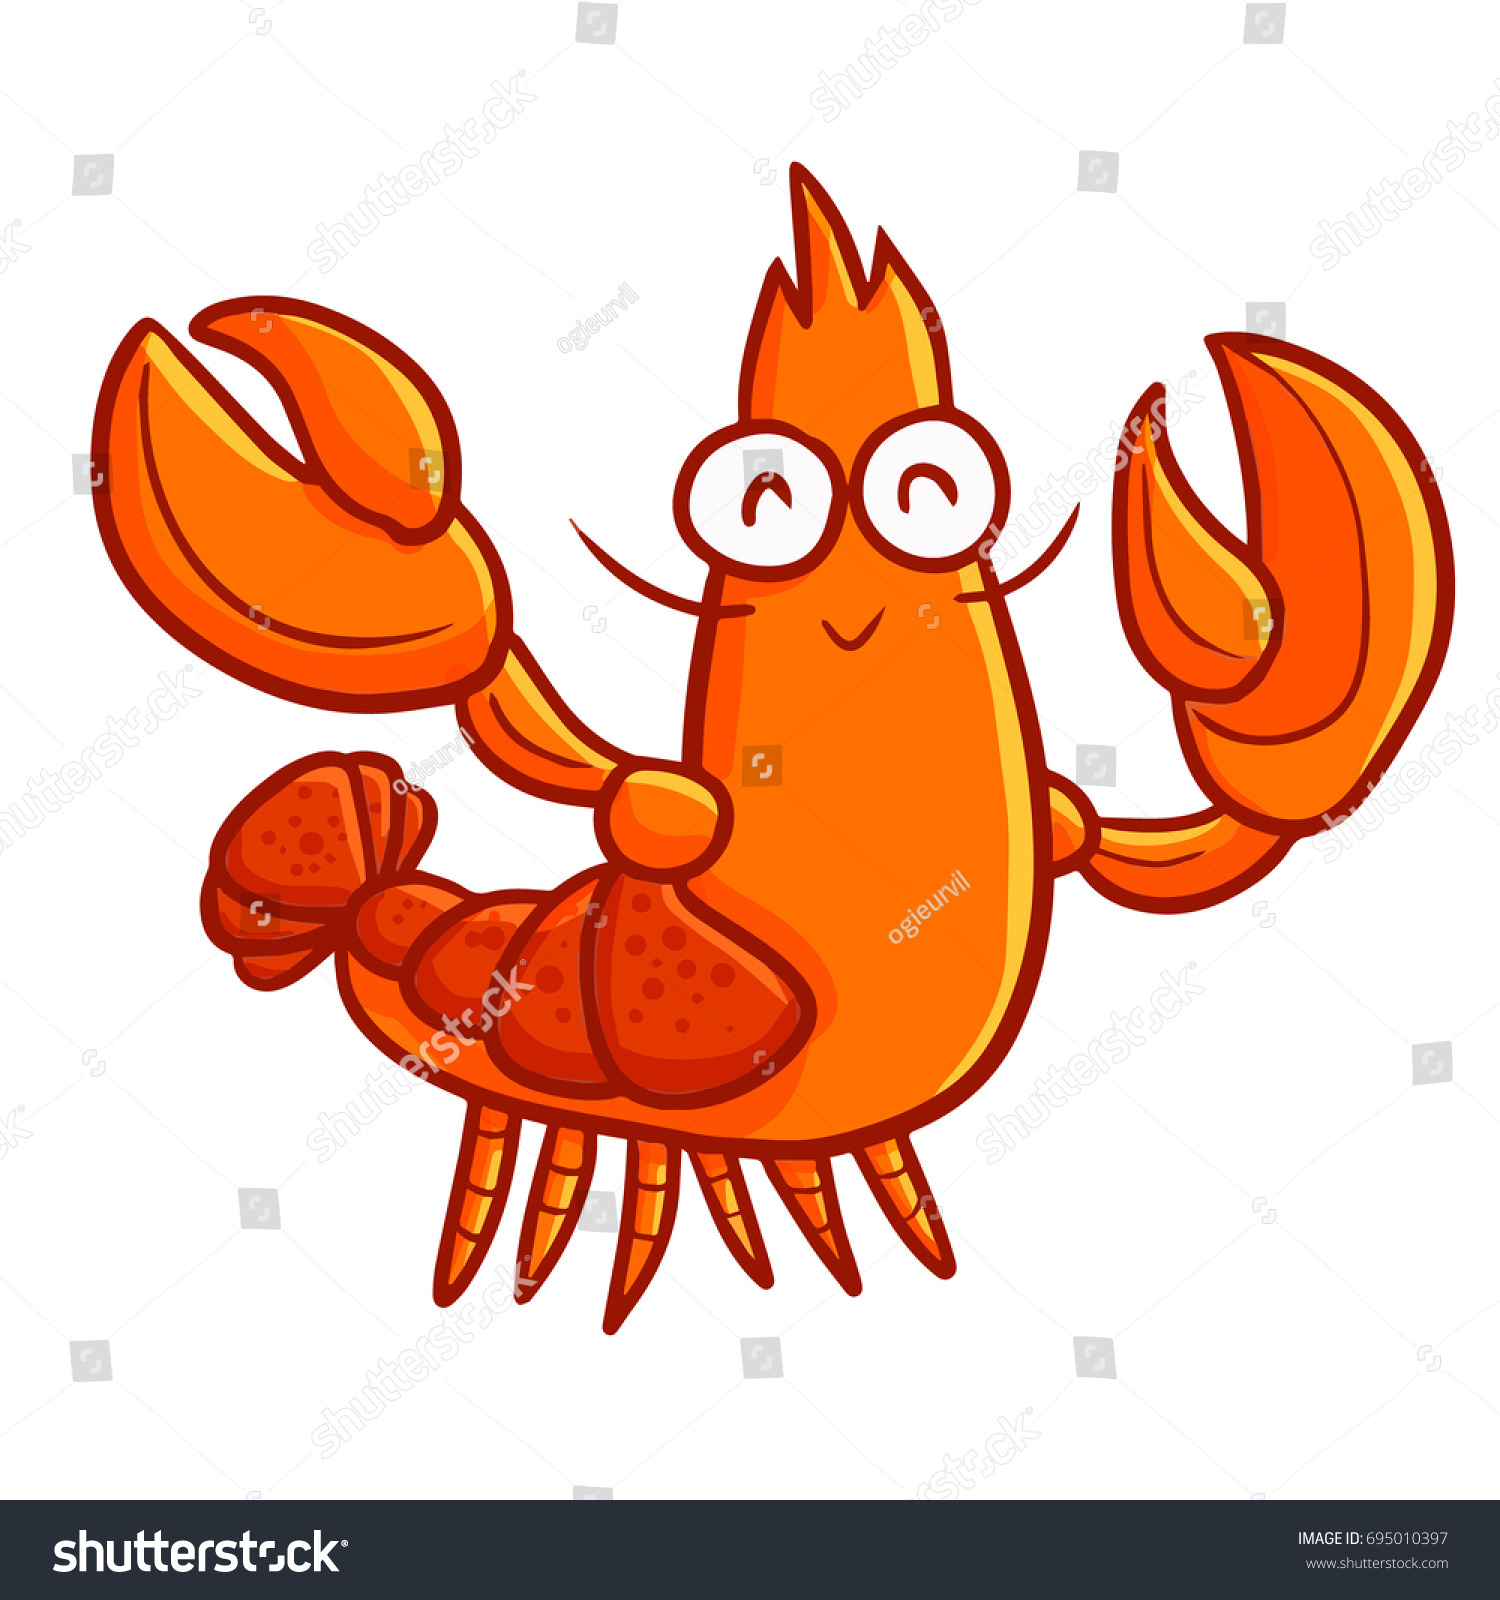 7,254 Cute lobster Images, Stock Photos & Vectors | Shutterstock